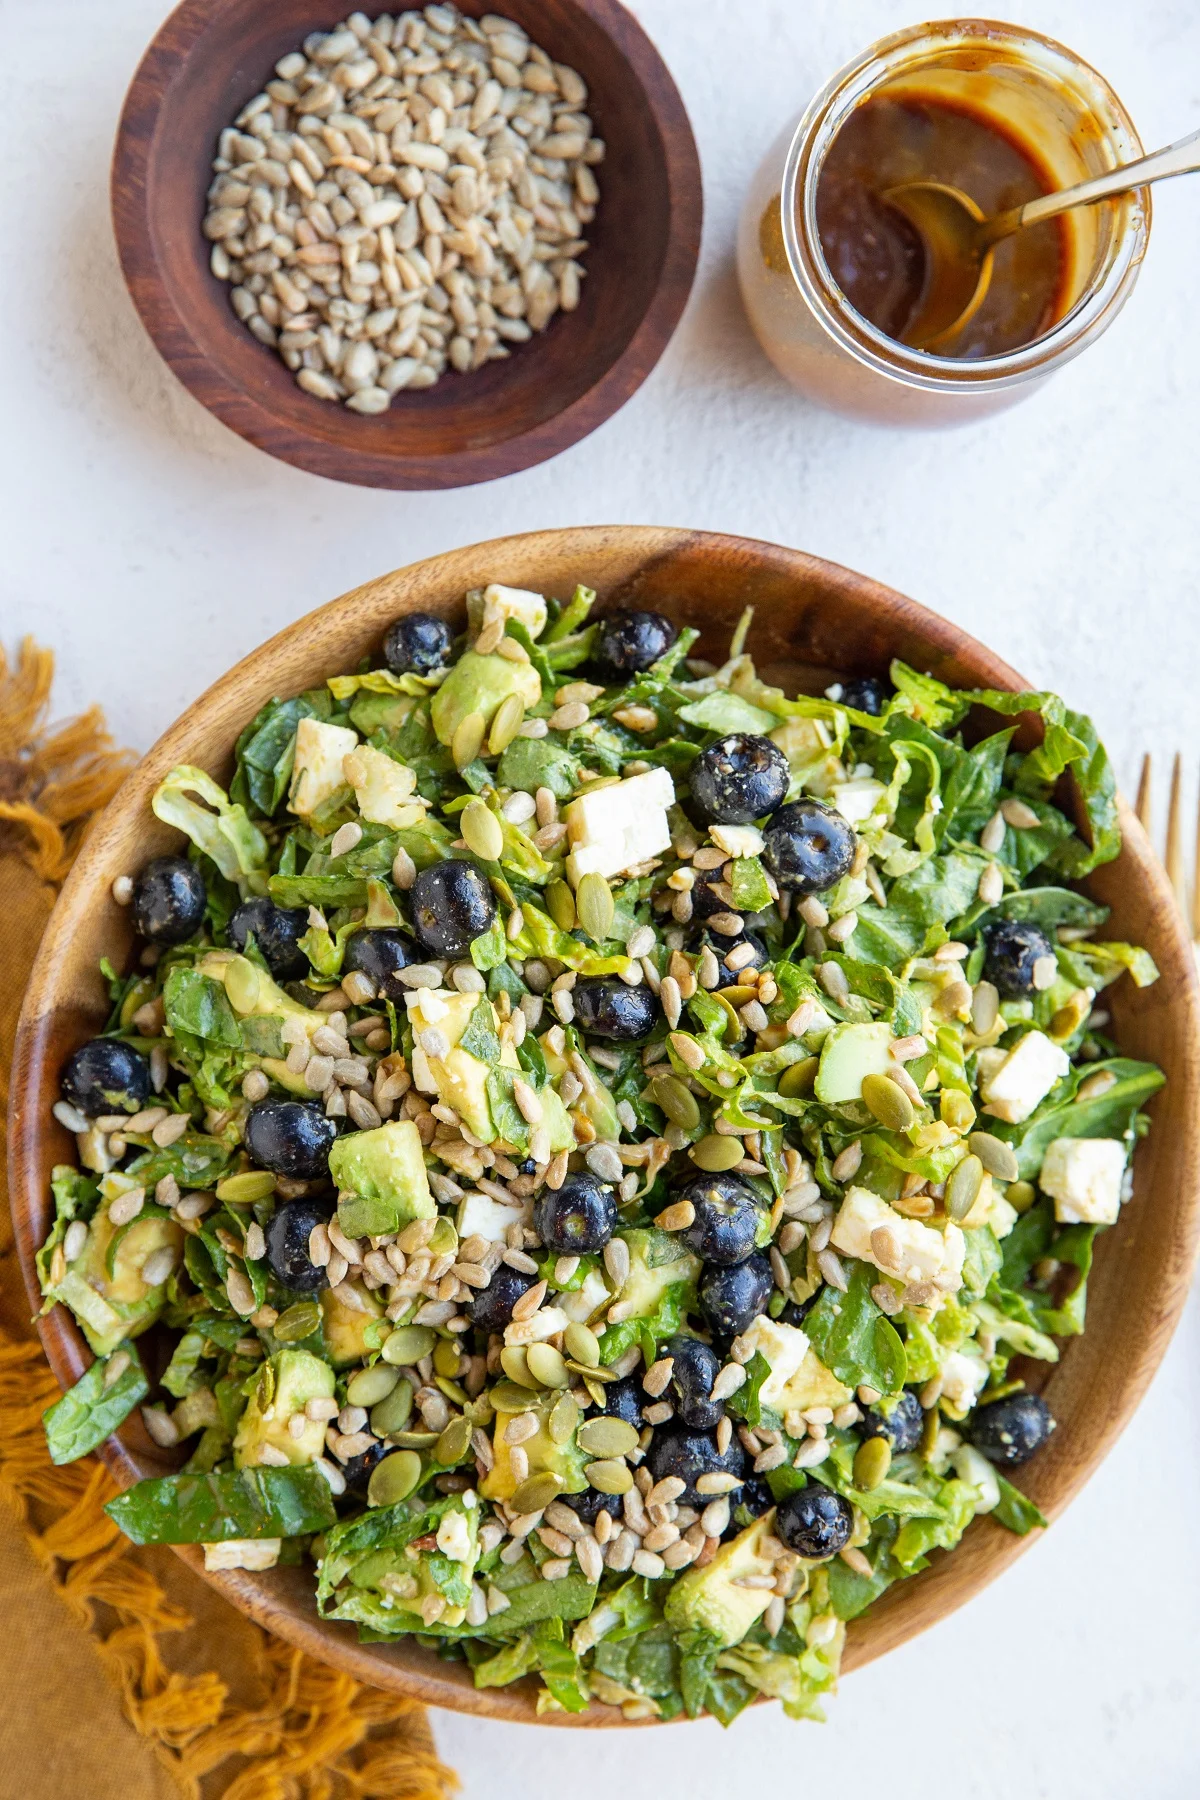 Bowl of green salad with blueberries, avocado, sunflower seeds, feta cheese, pumpkin seeds and balsamic vinaigrette mixed in.